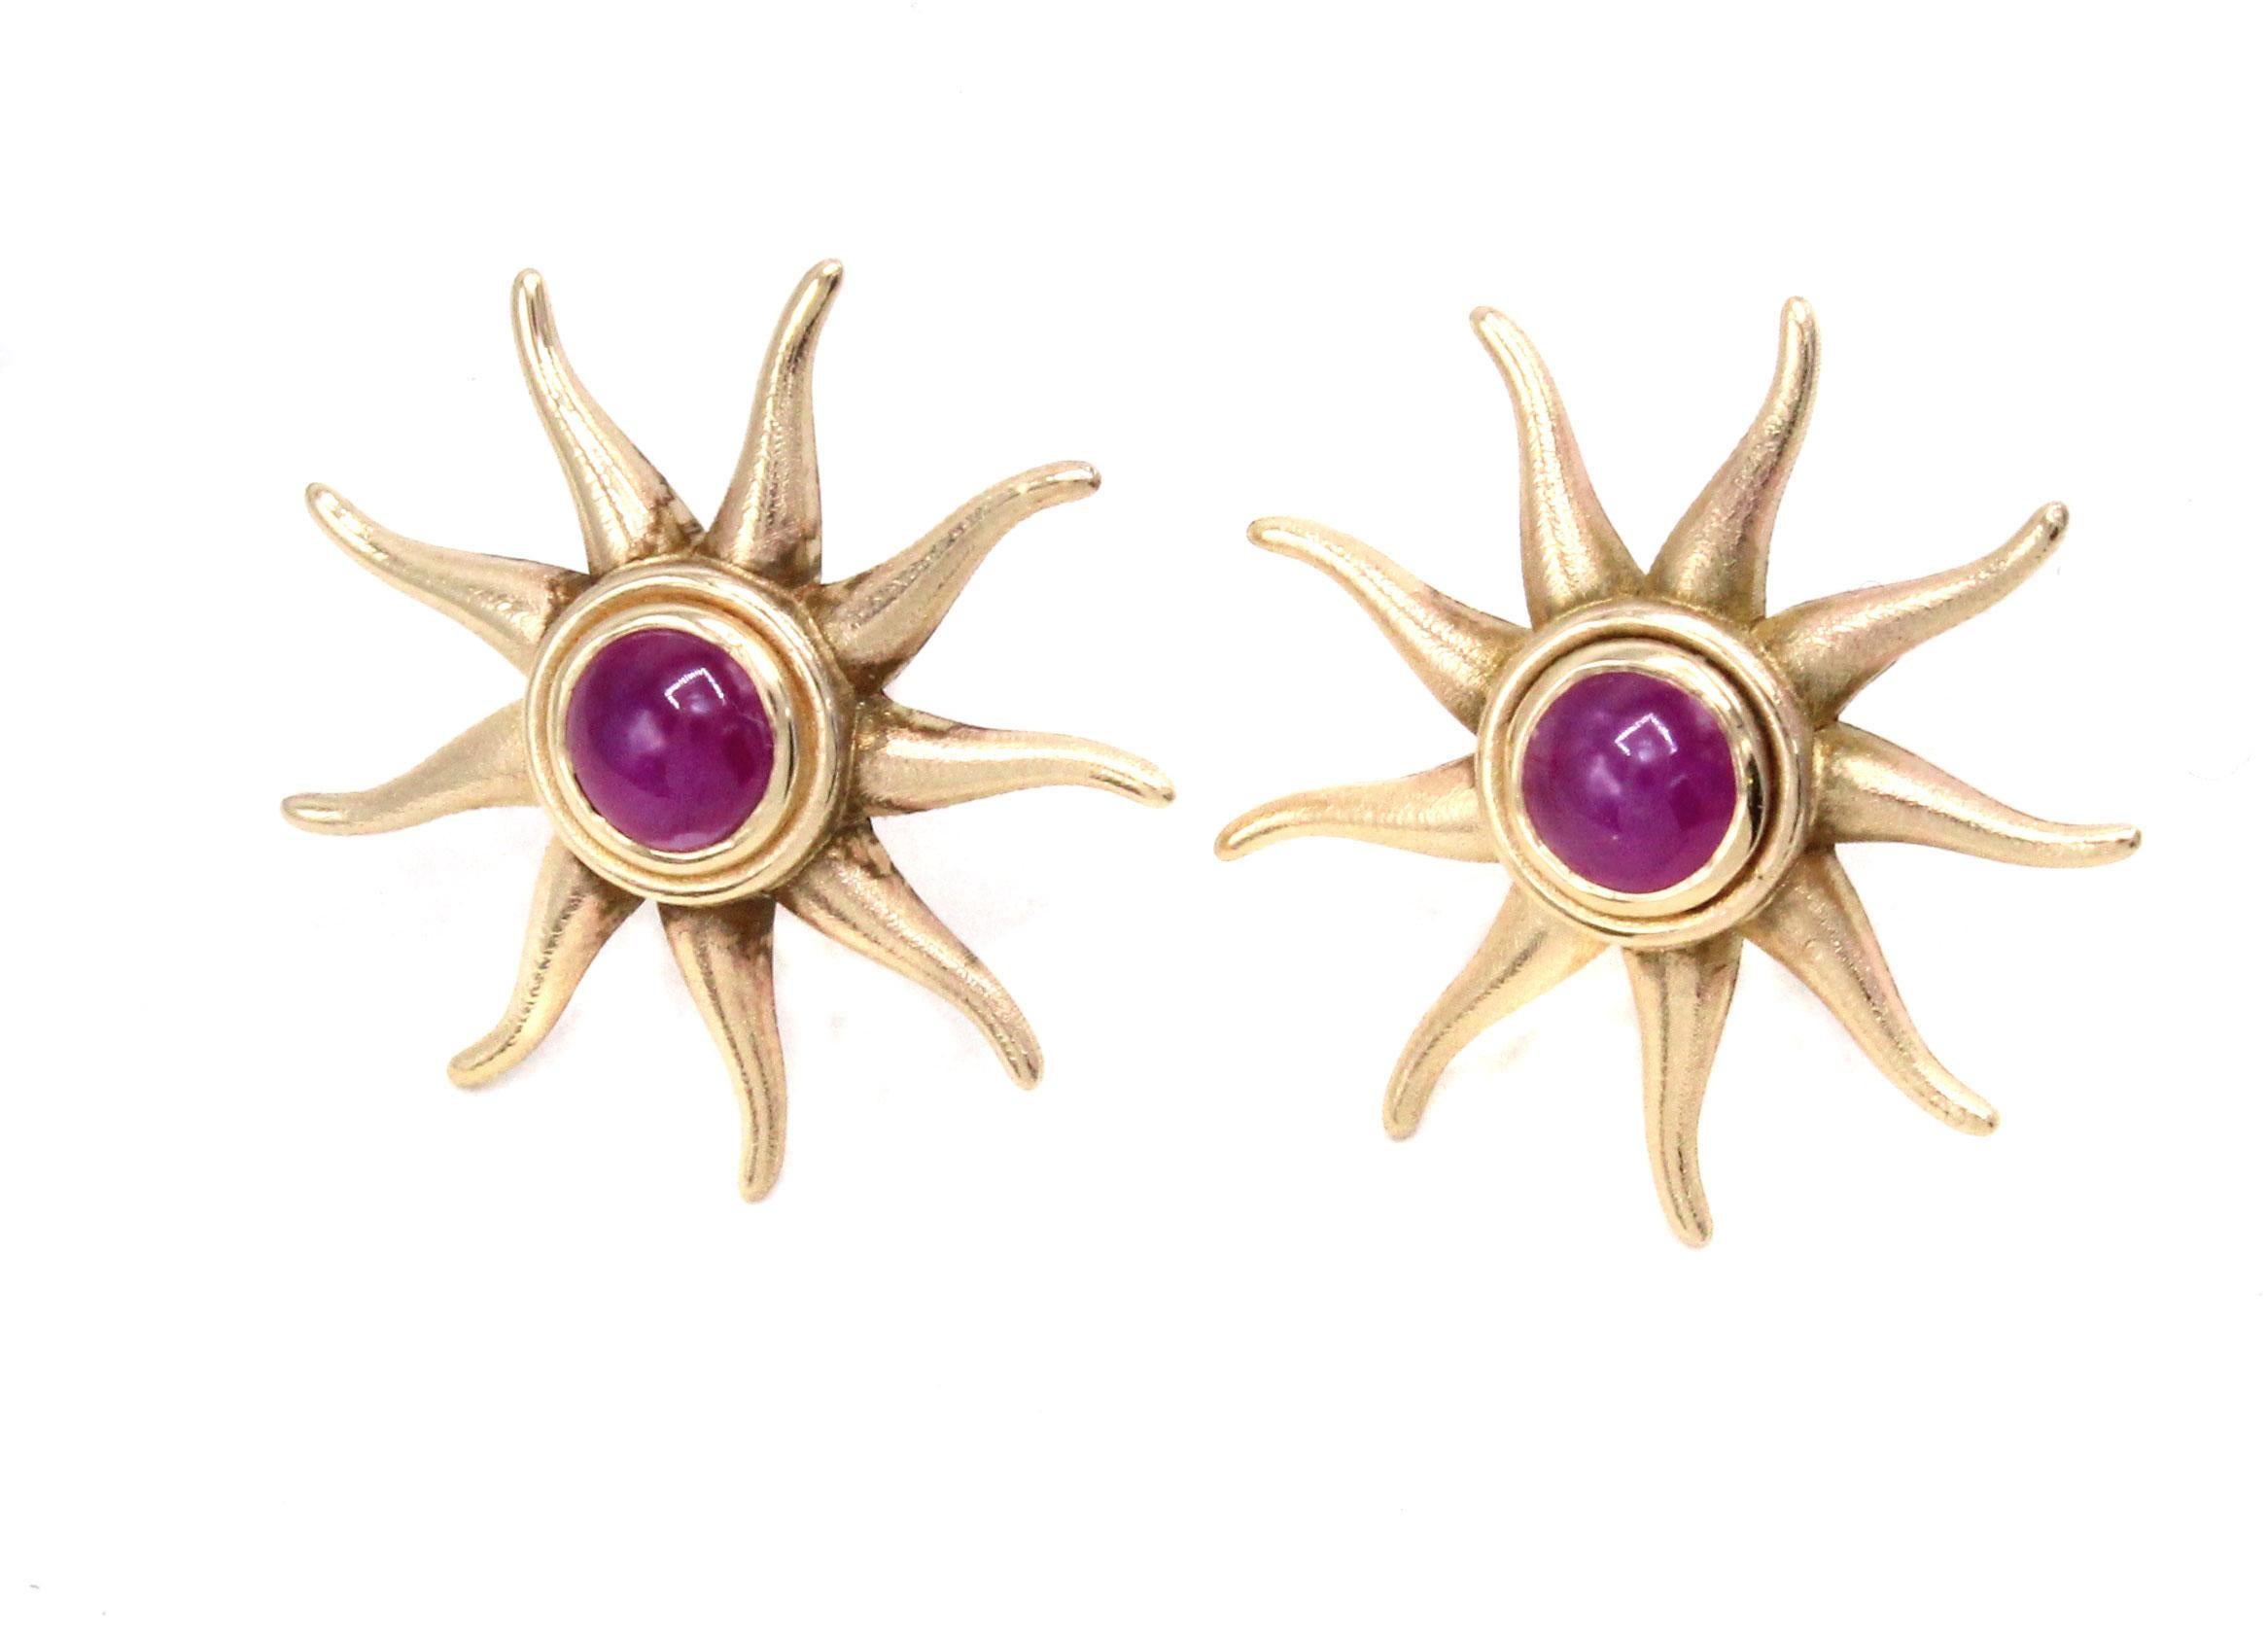 Our unique sun burst earrings are an exciting addition to the line of Rive Gauche Jewelry original designs, offering a new and exciting versatility. These wearable sunbursts are fun and elegant and provide the perfect balance between bold and